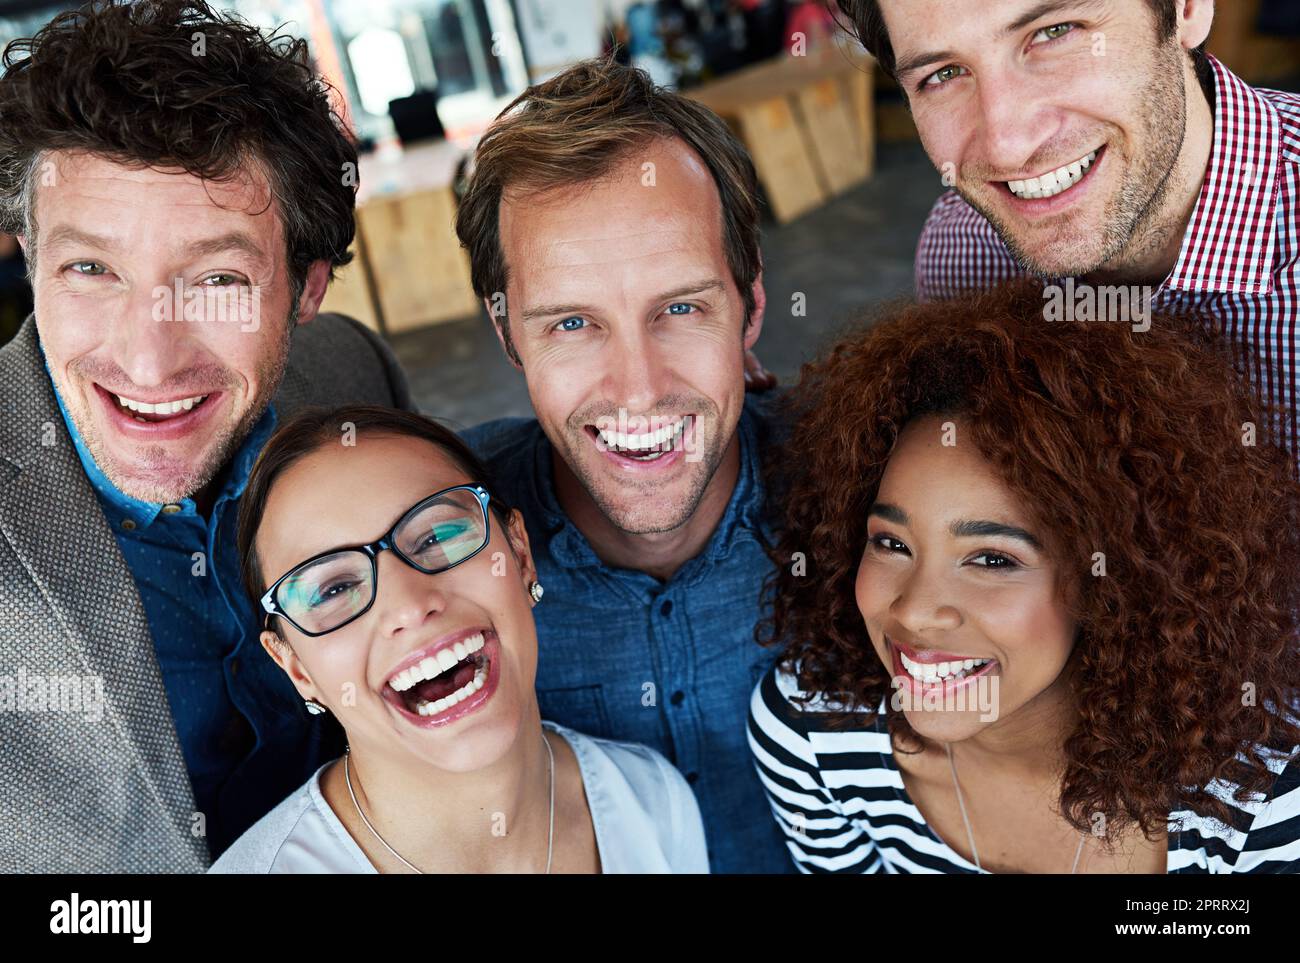 Best office ever. Portrait of a group of ecstatic colleagues in an office. Stock Photo